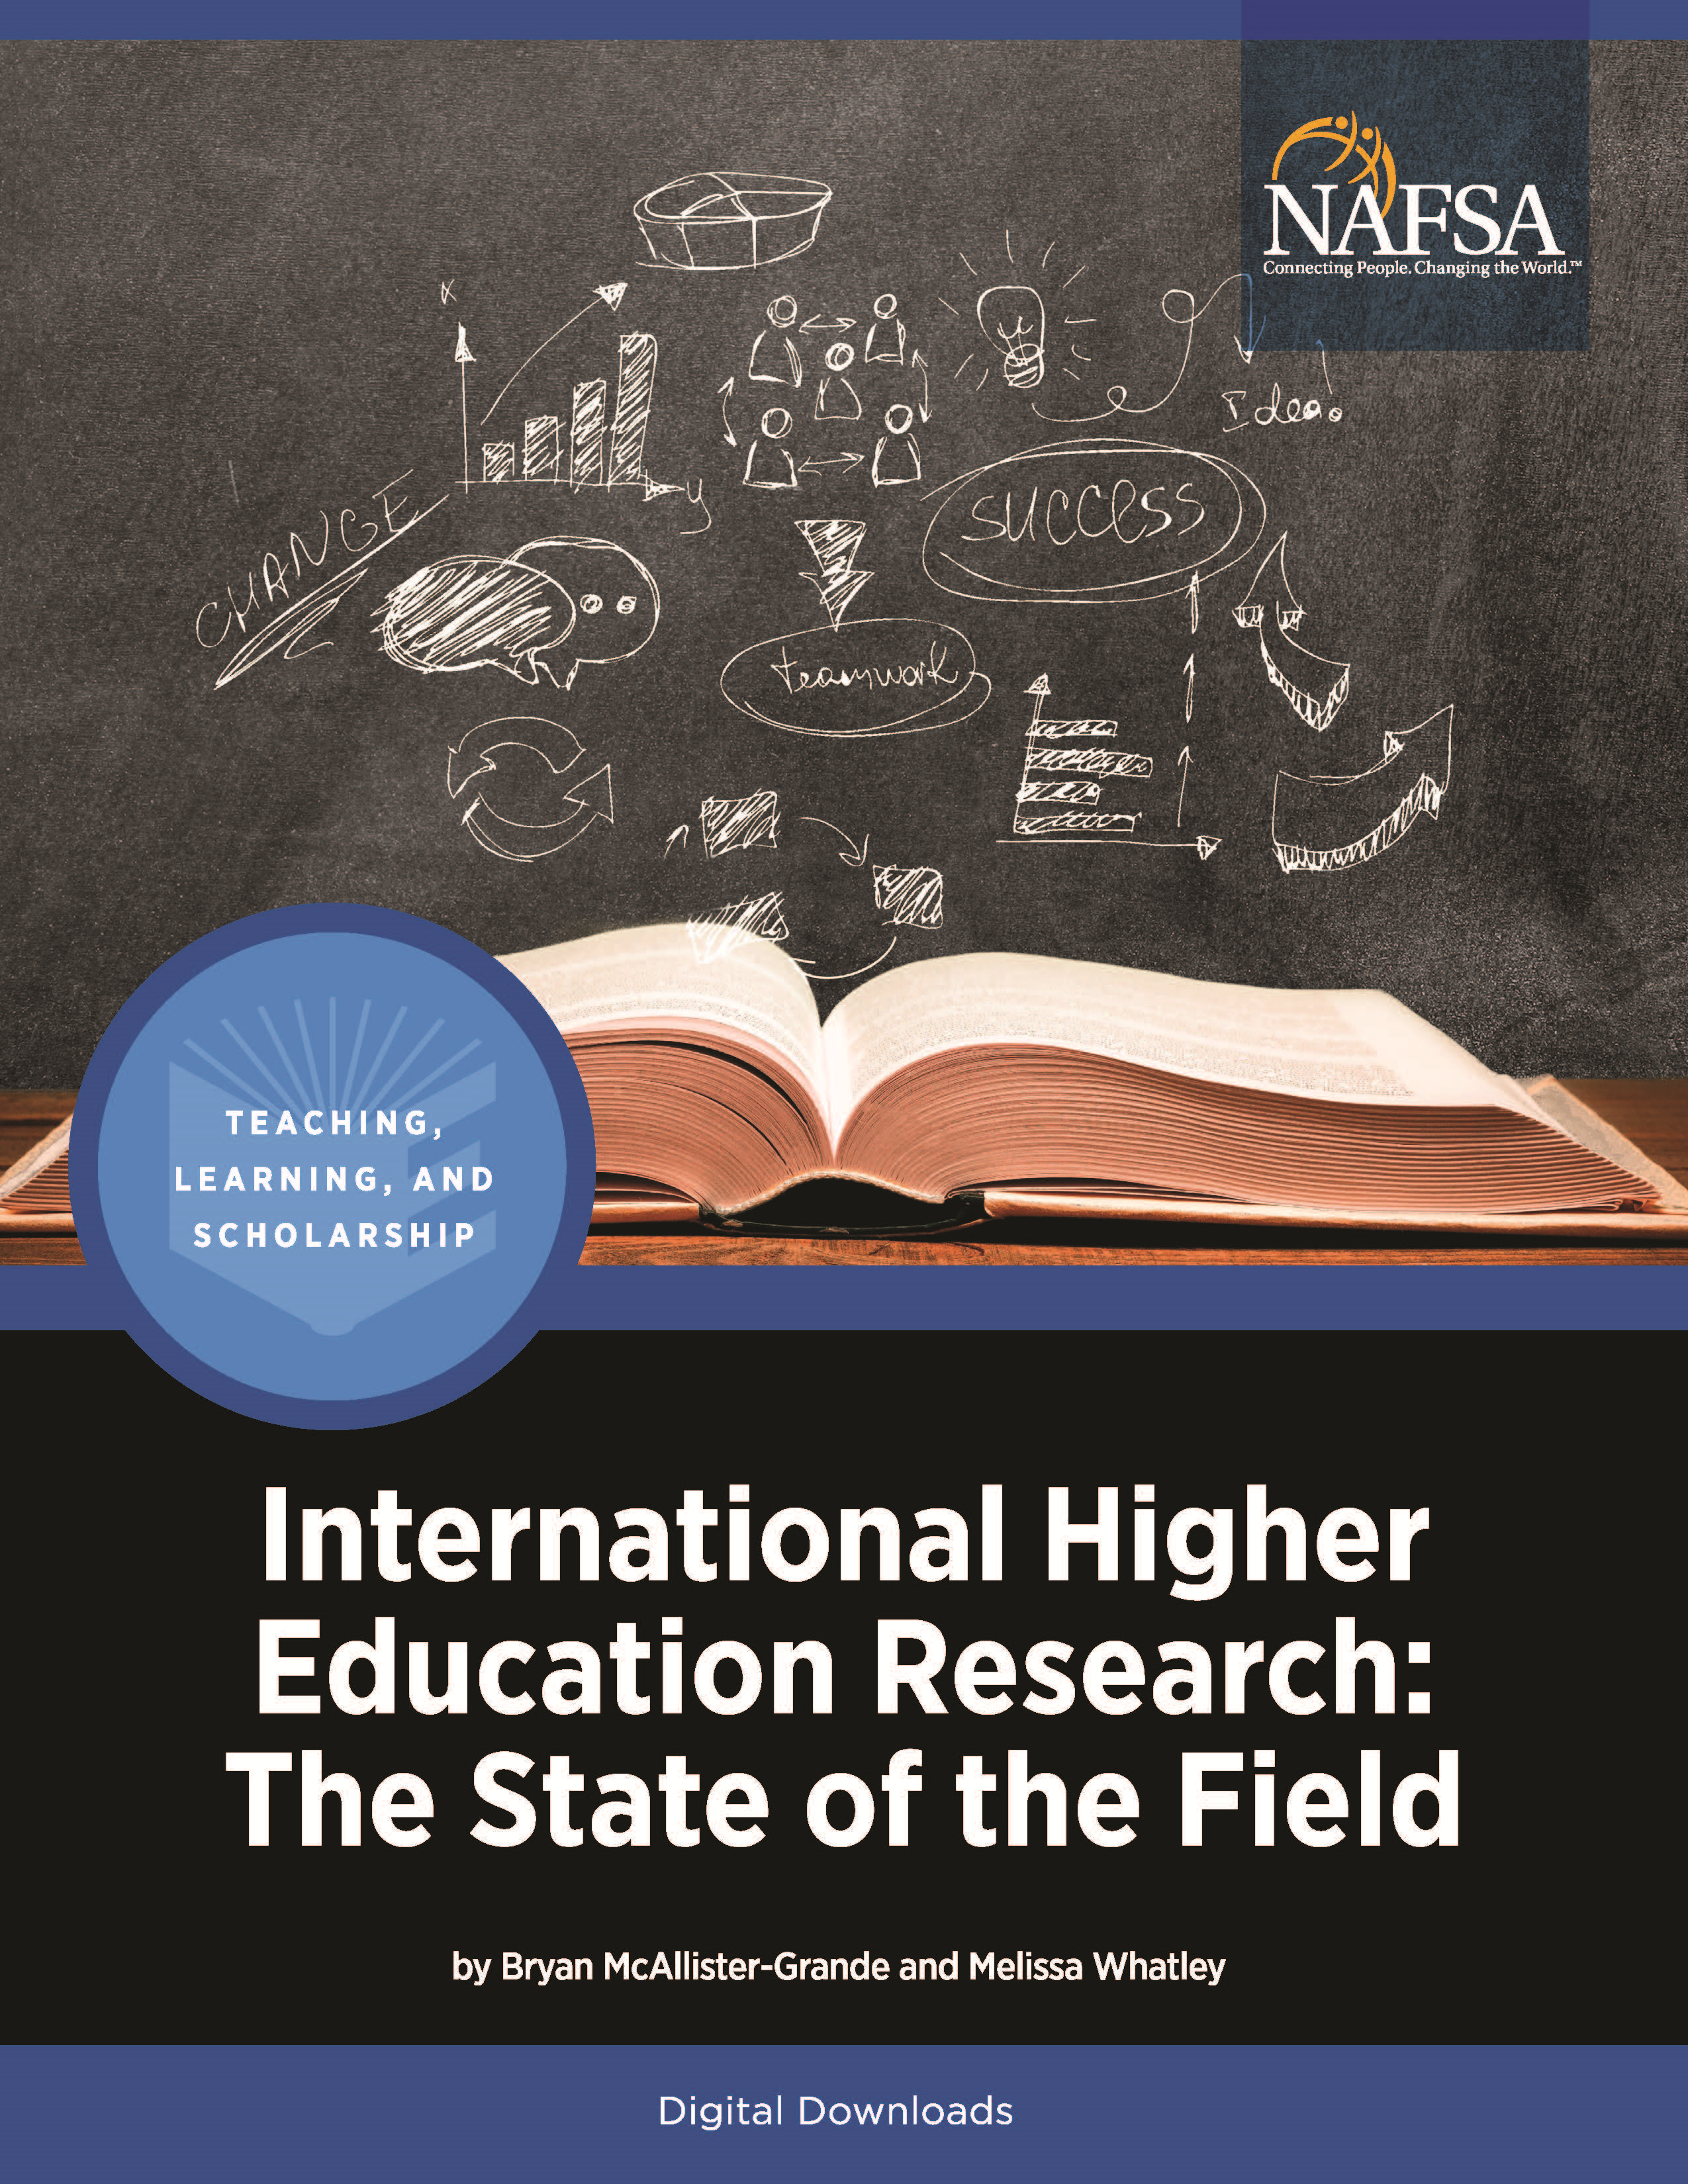 International Higher Education Research: State of the Field